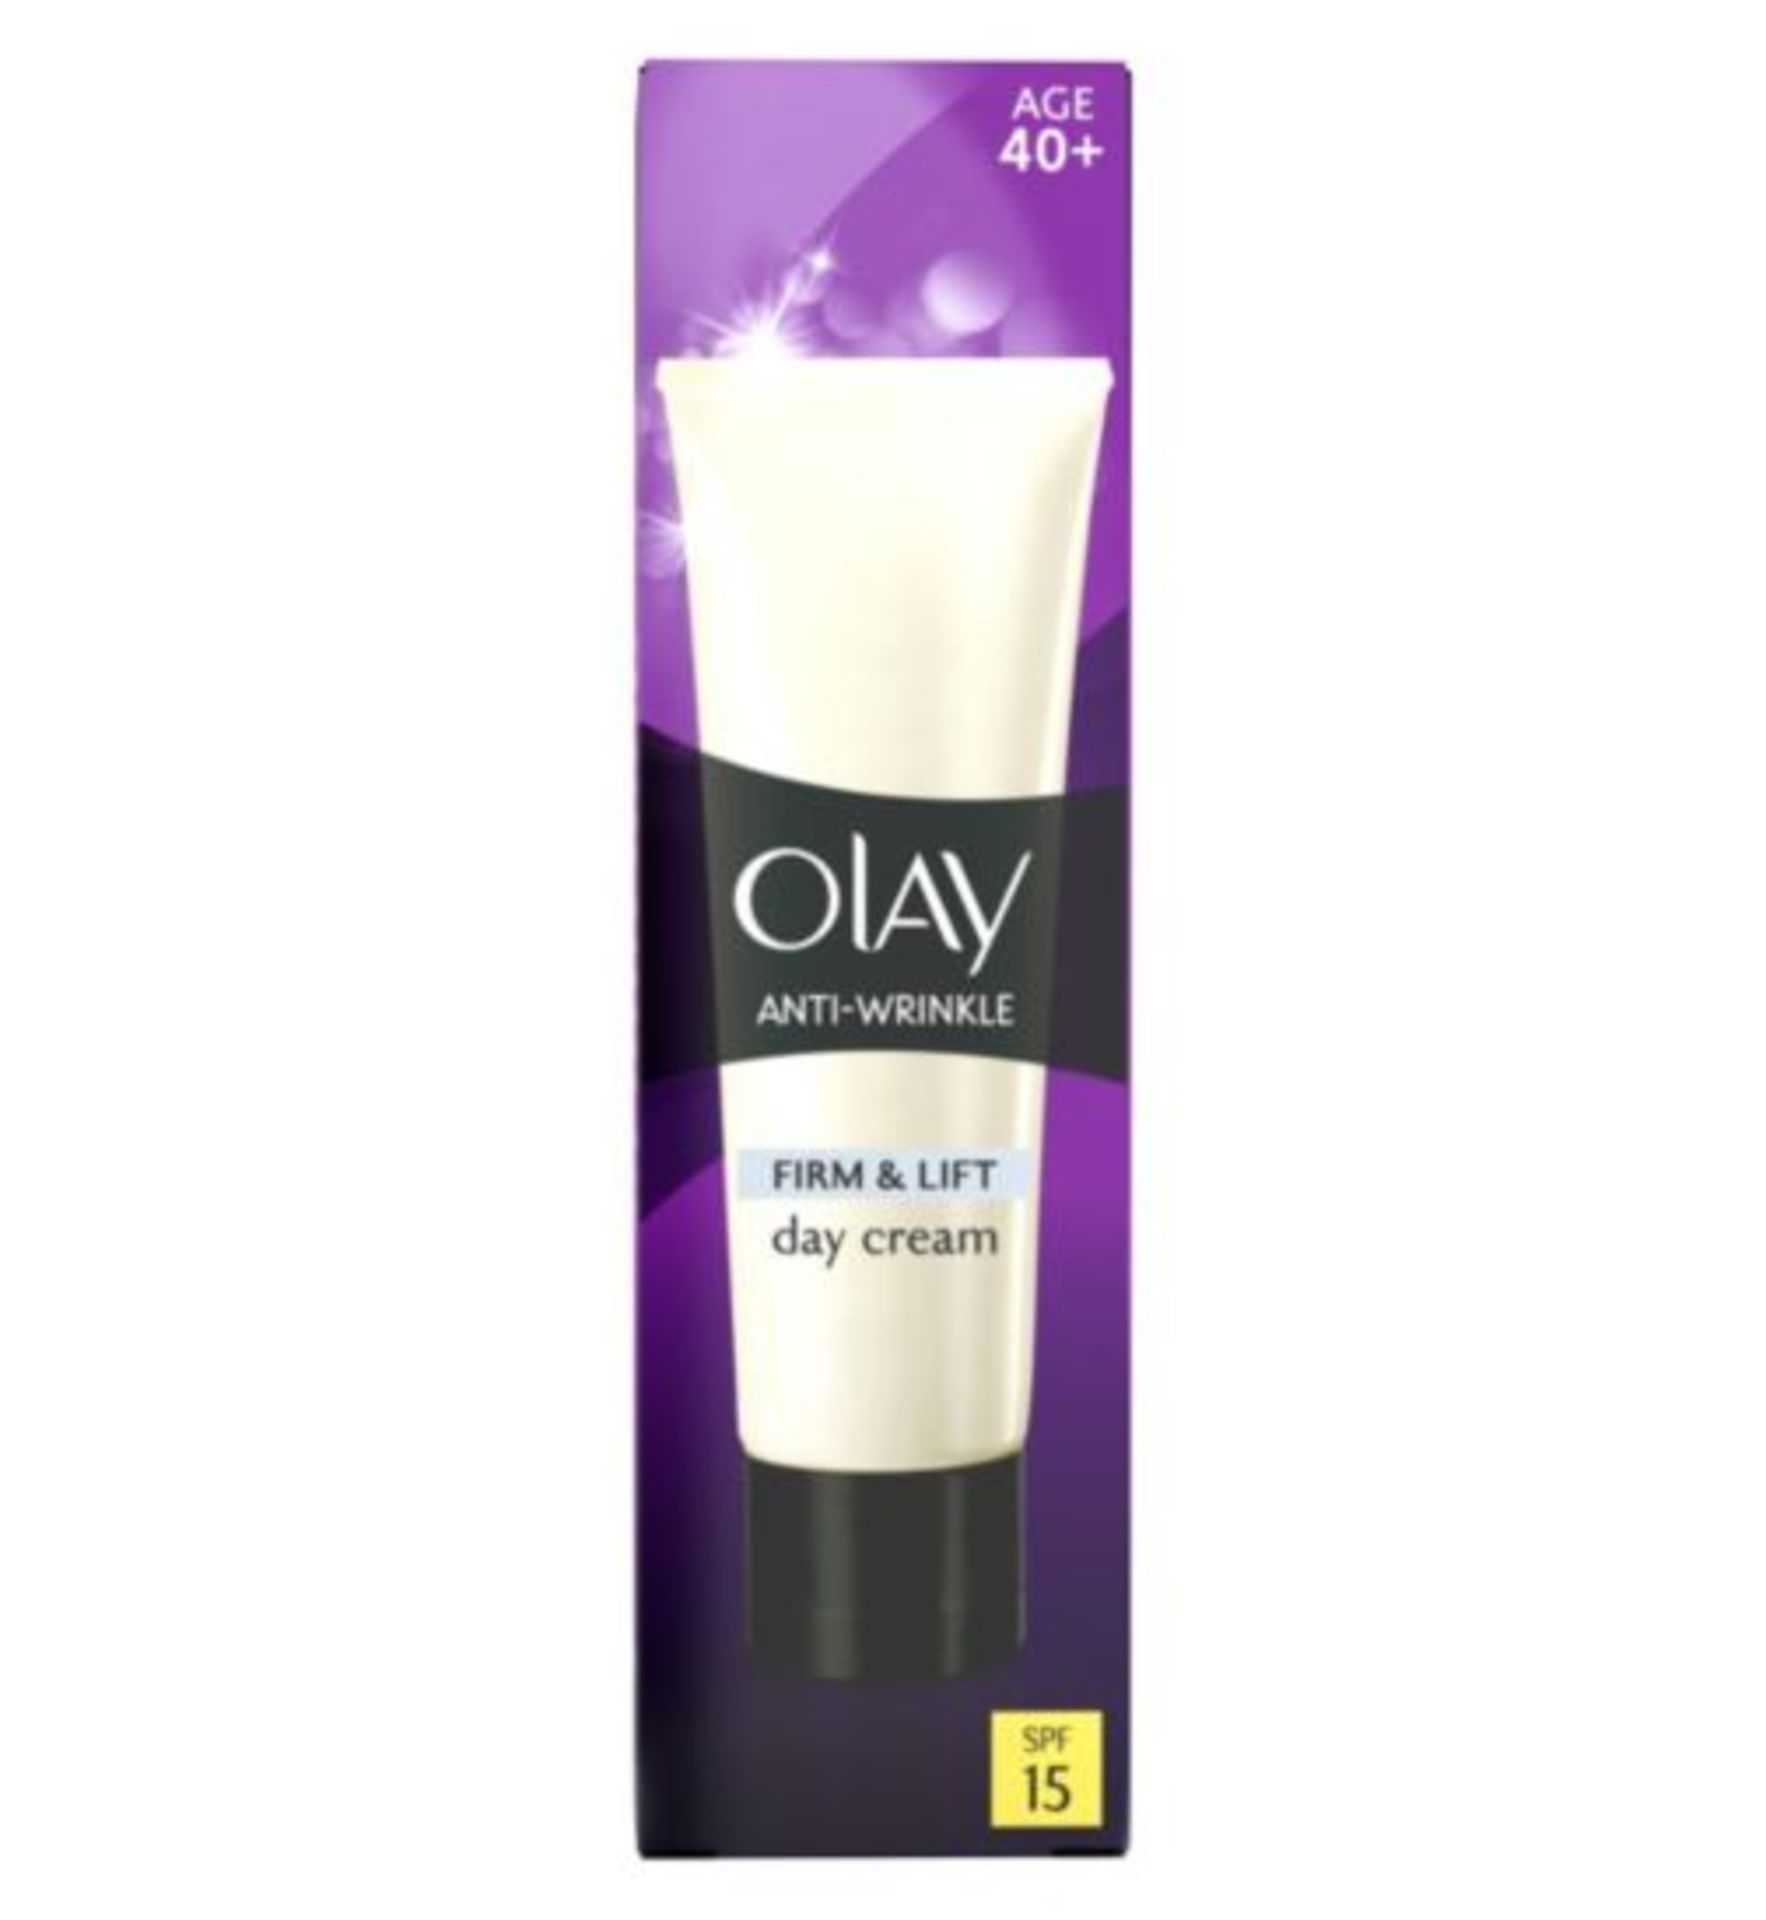 V Grade A Olay Anti-Wrinkle firm and lift day cream SPF 15 Aged 40+